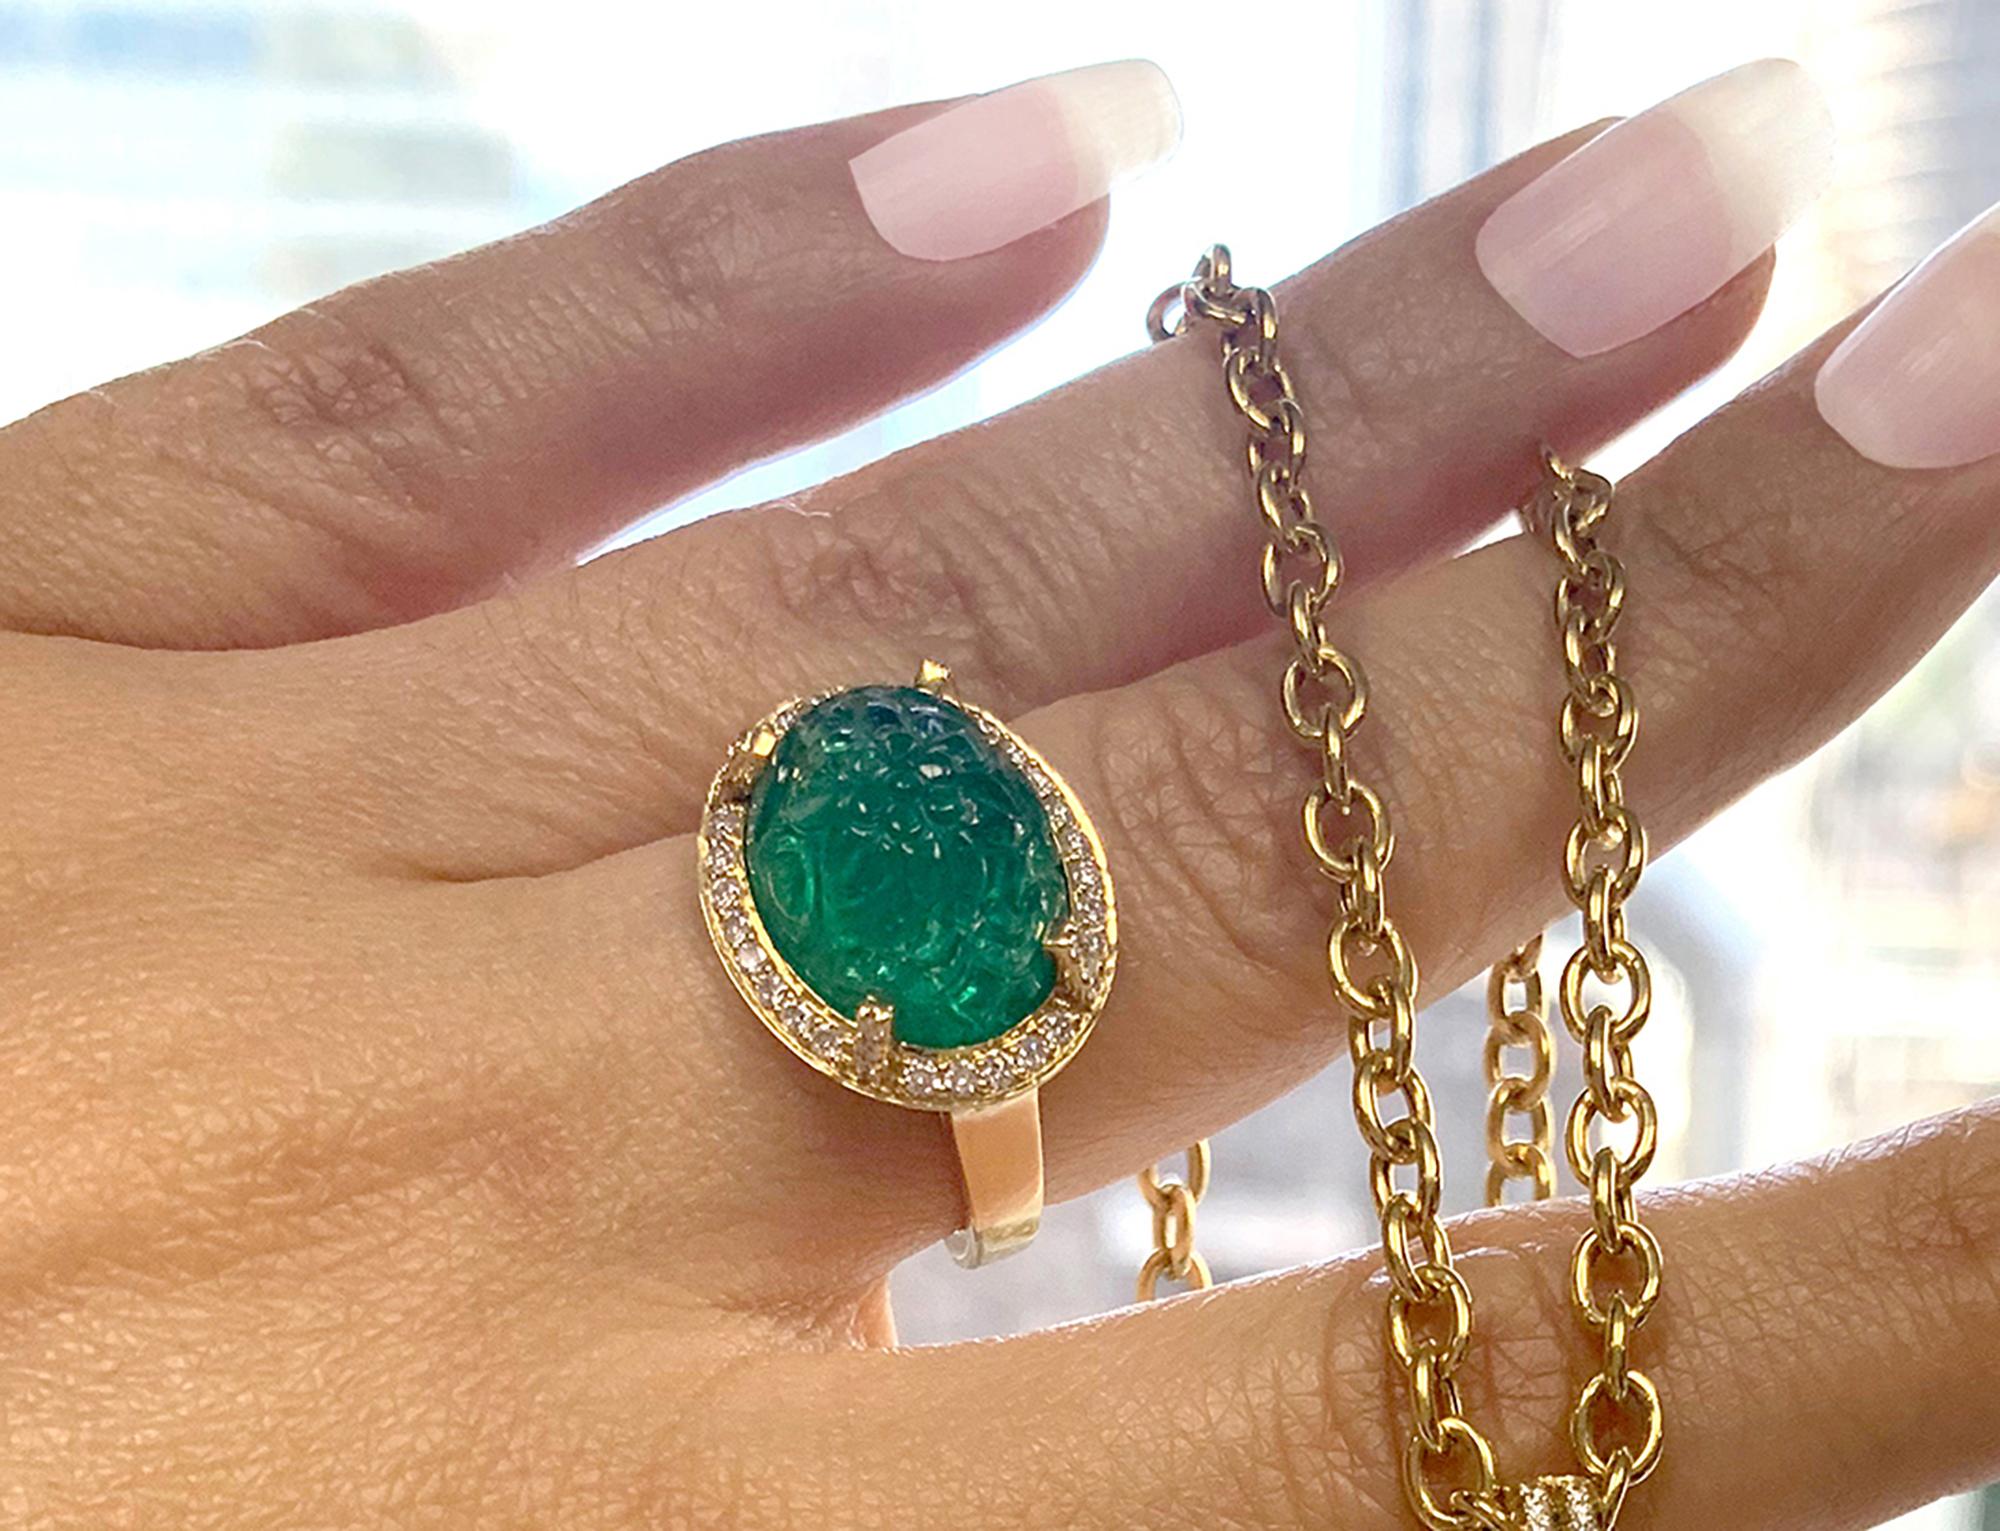 Carved Emerald Ring with Diamonds in 18K Yellow Gold, from 'G-One' Collection. Our G-One Collection undeniably carries the most special pieces of Goshwara. The sought-after, one-of-a-kind pieces speak to each unique personality of the person wearing